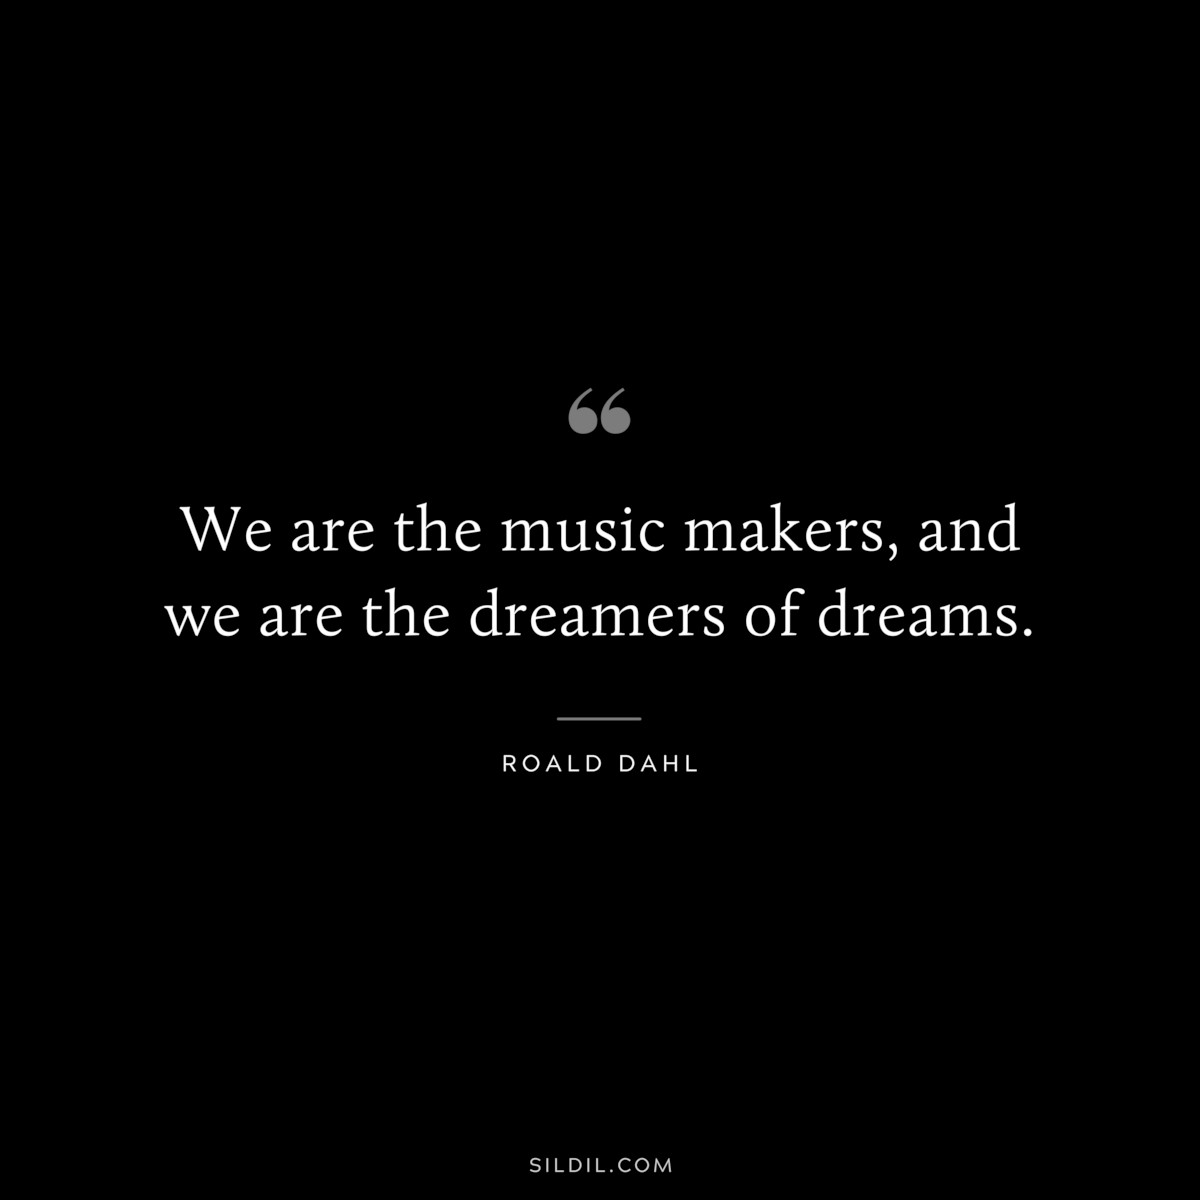 We are the music makers, and we are the dreamers of dreams. ― Roald Dahl